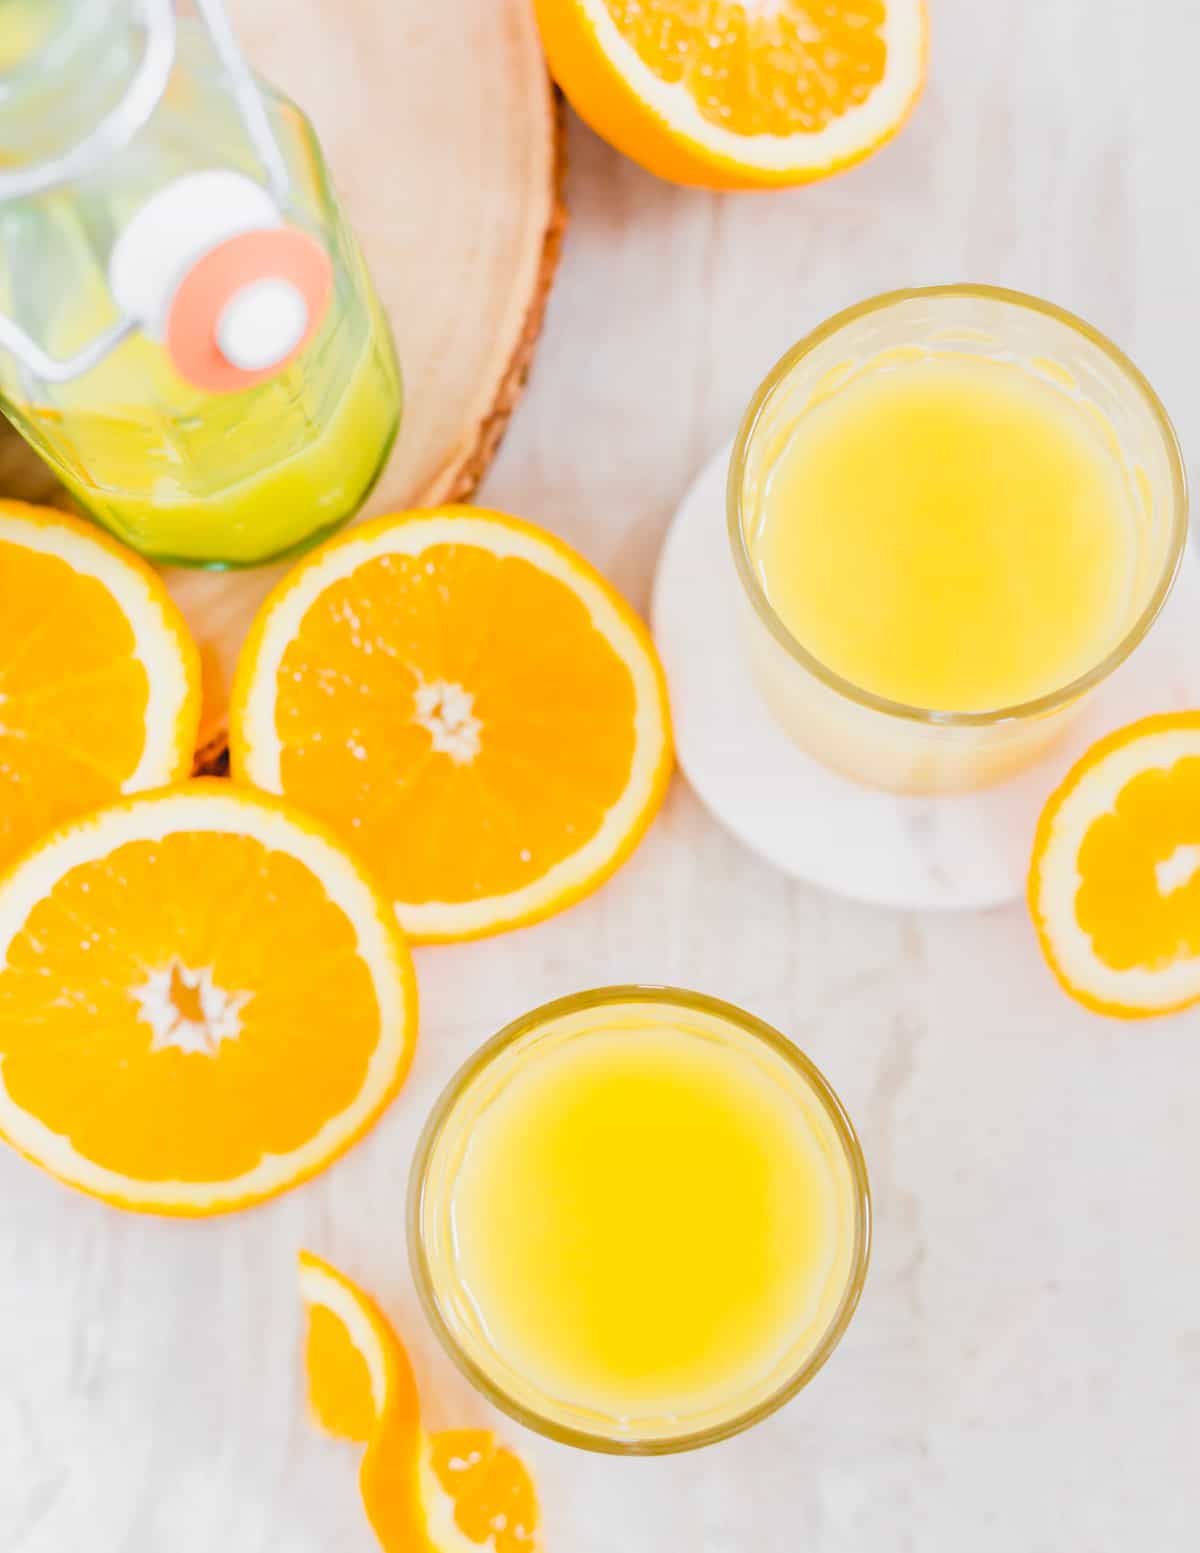 An adrenal drink in glasses with orange slices next to it.